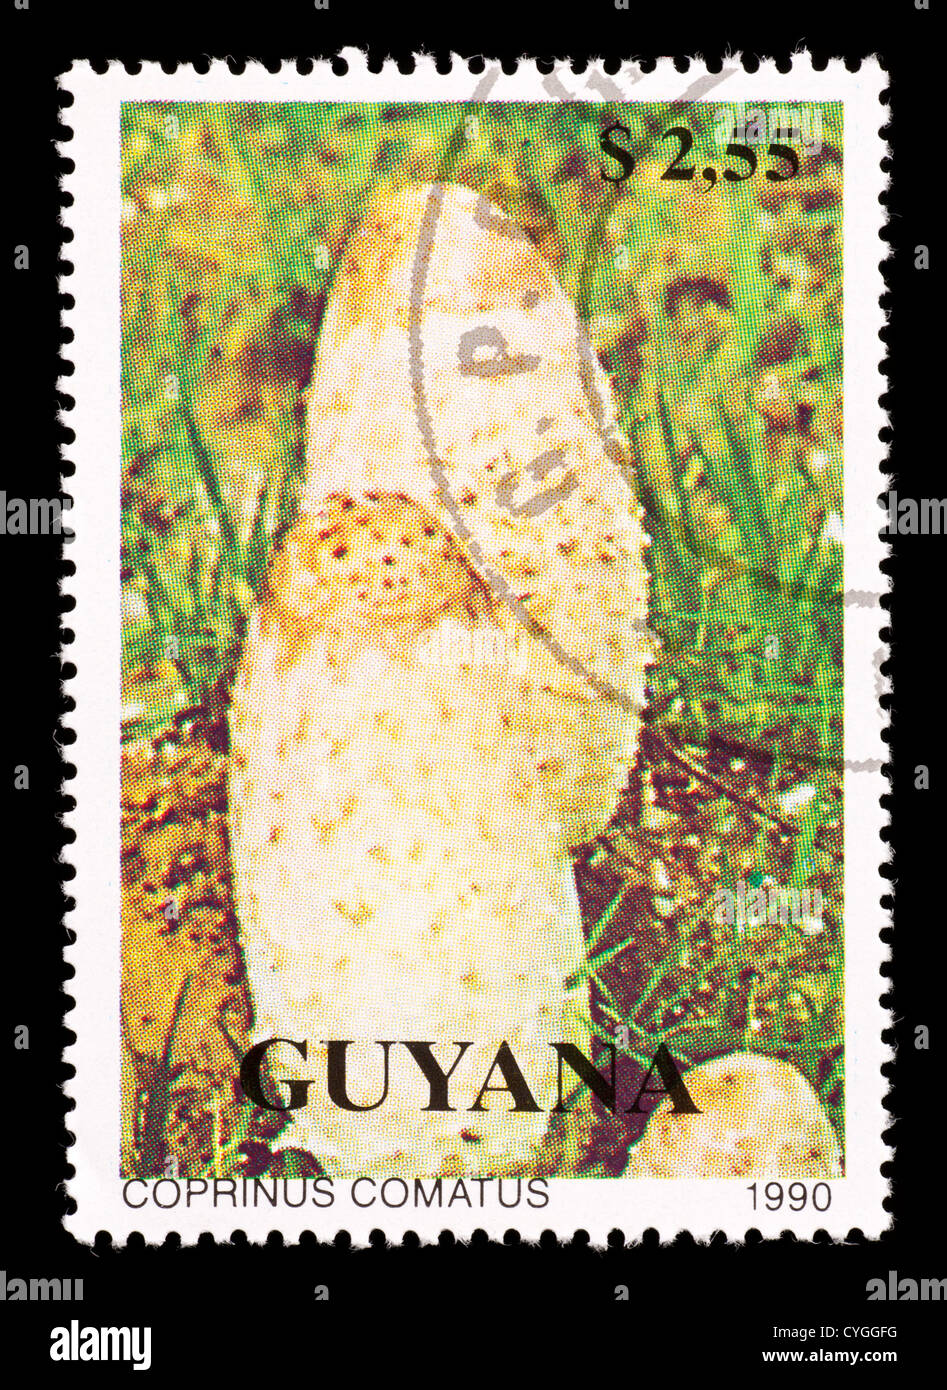 Postage stamp from Guyana depicting a shaggy ink cap, lawyer's wig, or shaggy mane mushroom (Coprinus comatus) Stock Photo